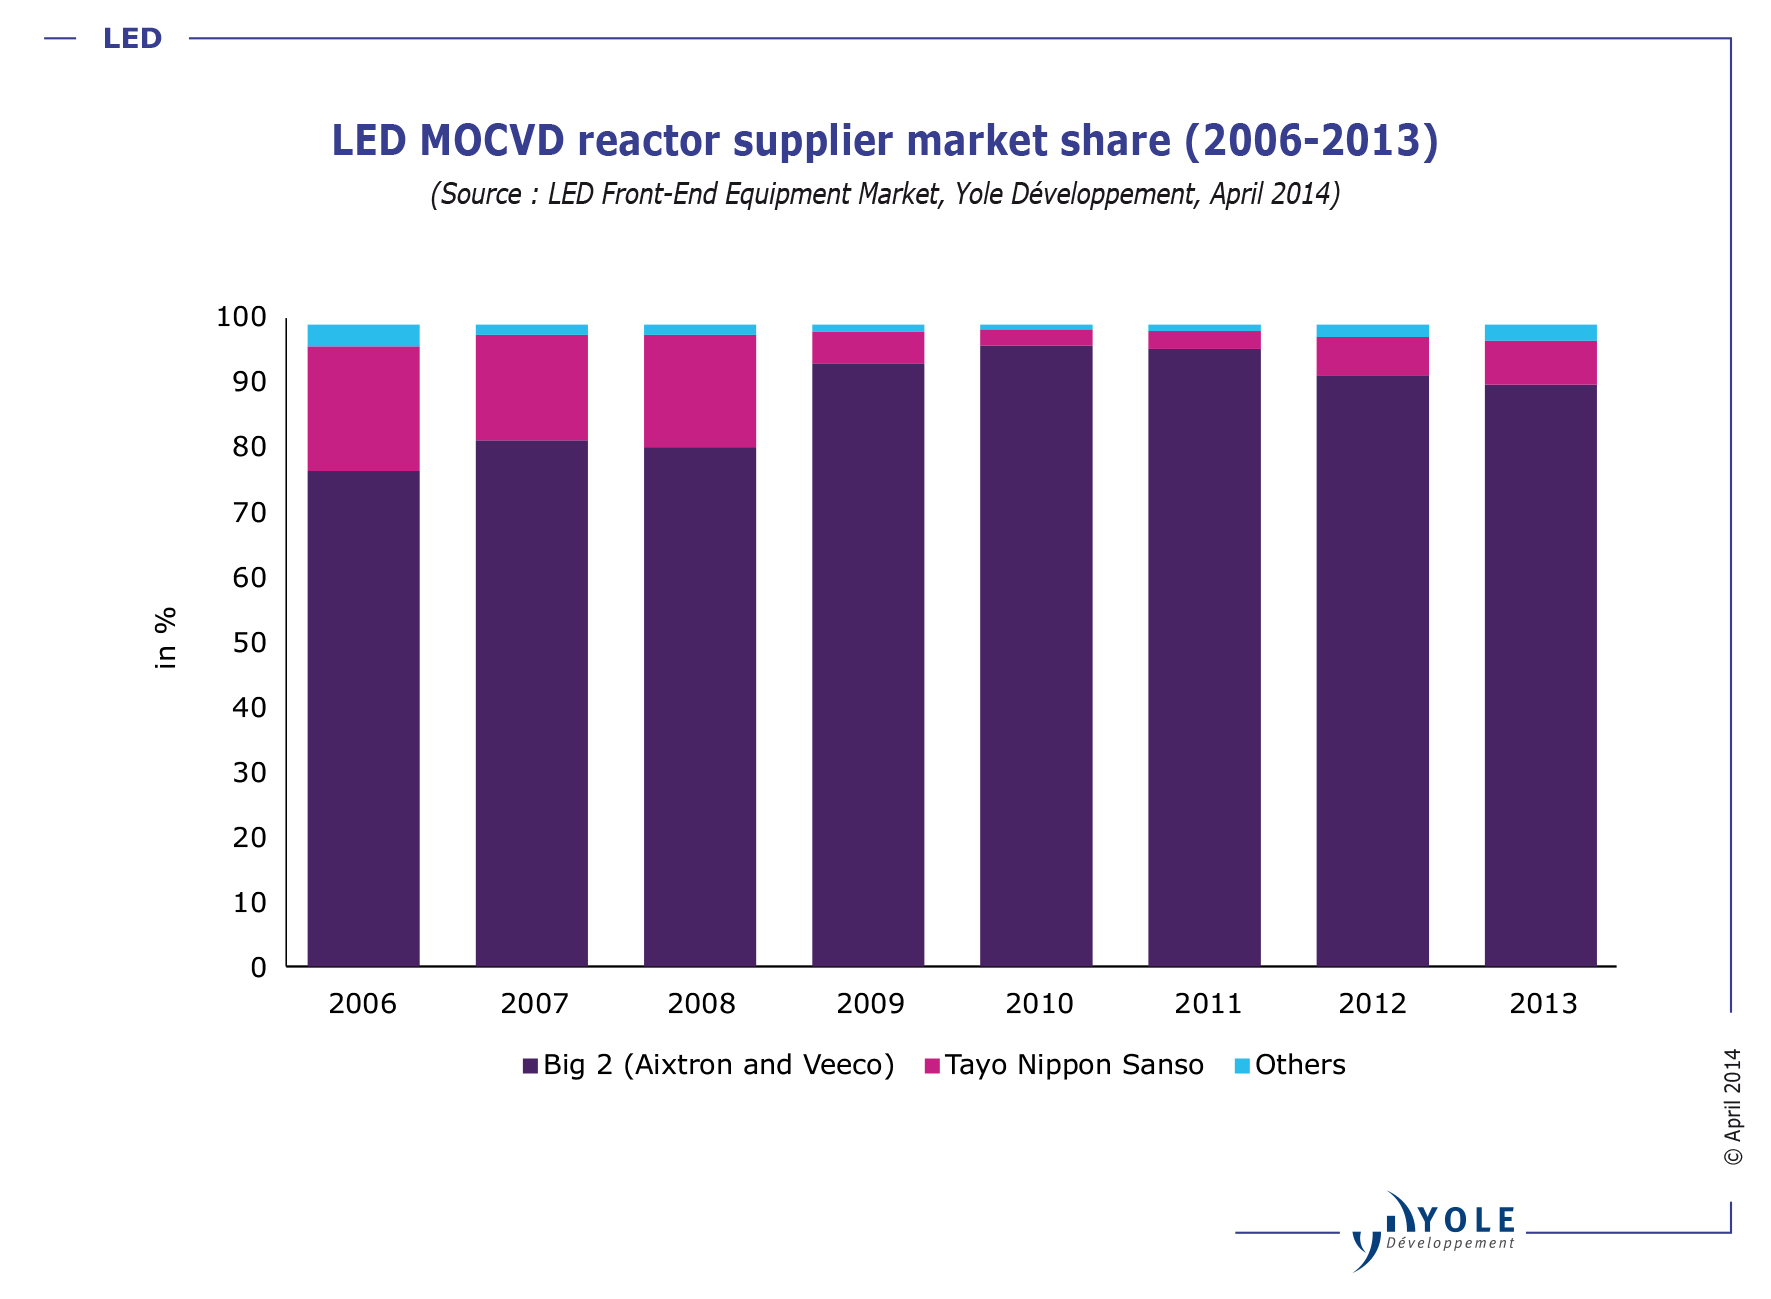 With an Increased Competition in The Mocvd Industry, The Leaders Are Still Getting Most of The Equipment Business in a Recovering Led Front-End Equipment Market